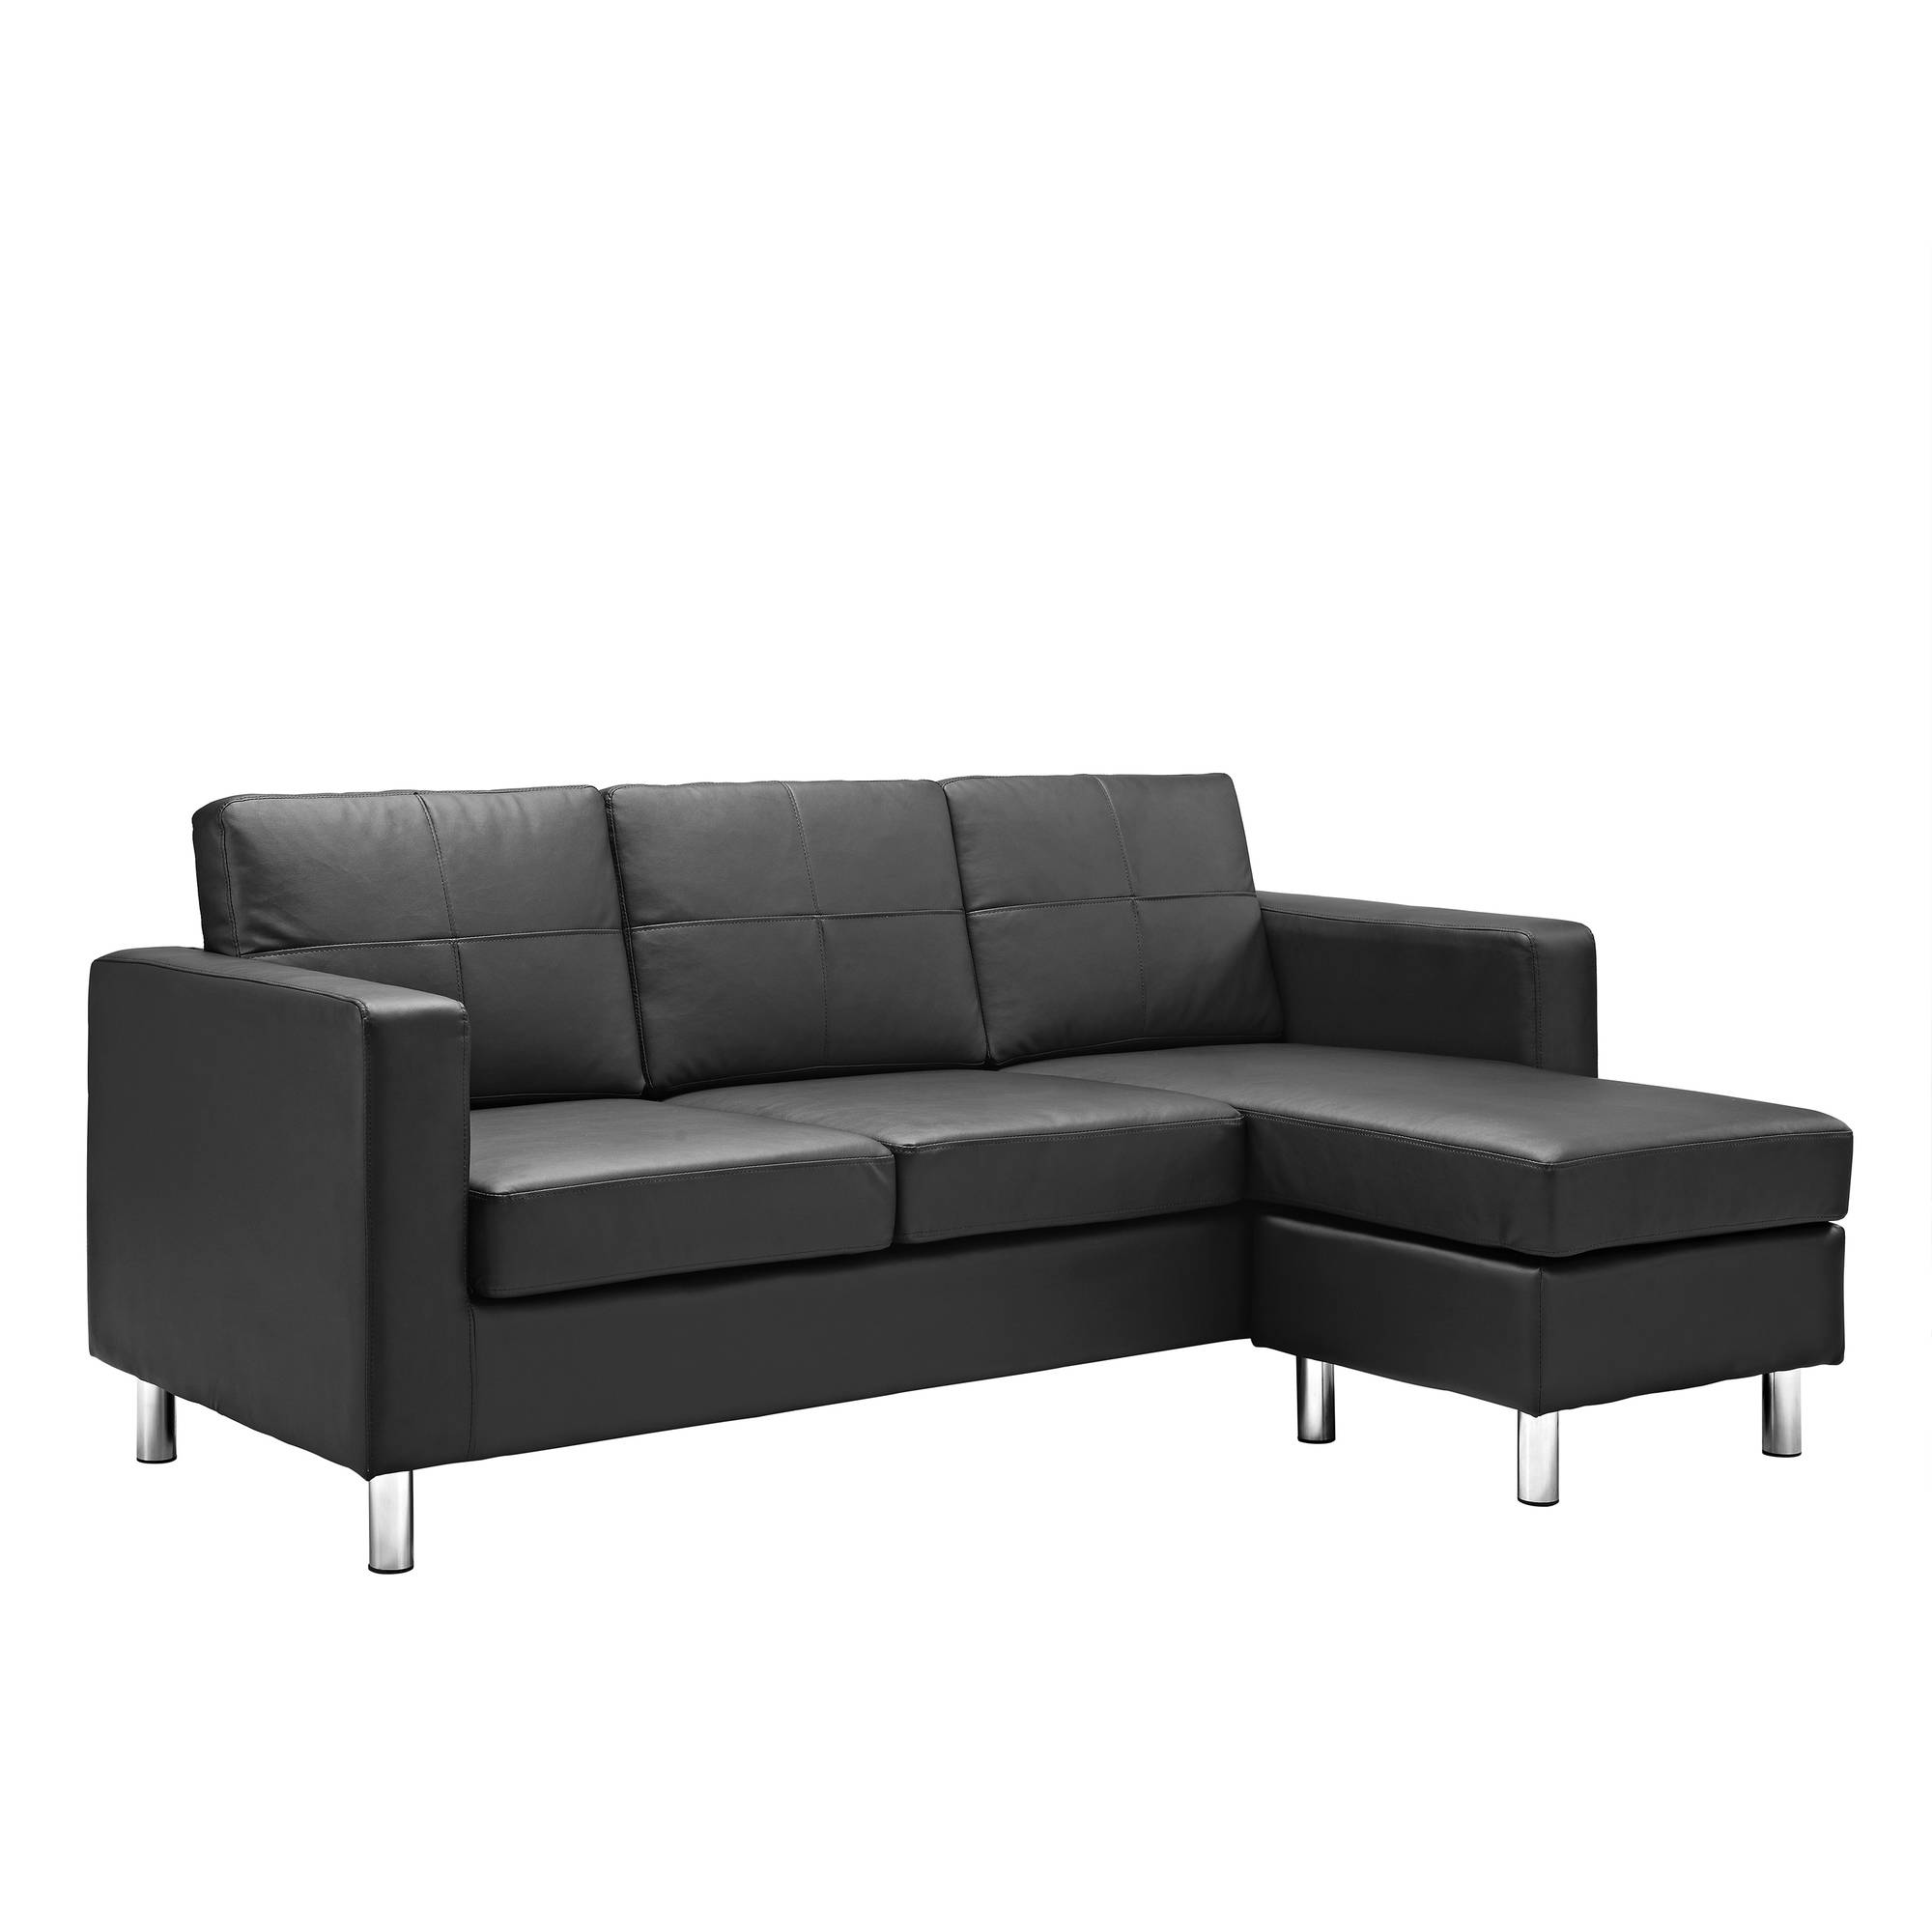 DHP Small Spaces Configurable Sectional Sofa, Multiple Colors - Black - image 2 of 6